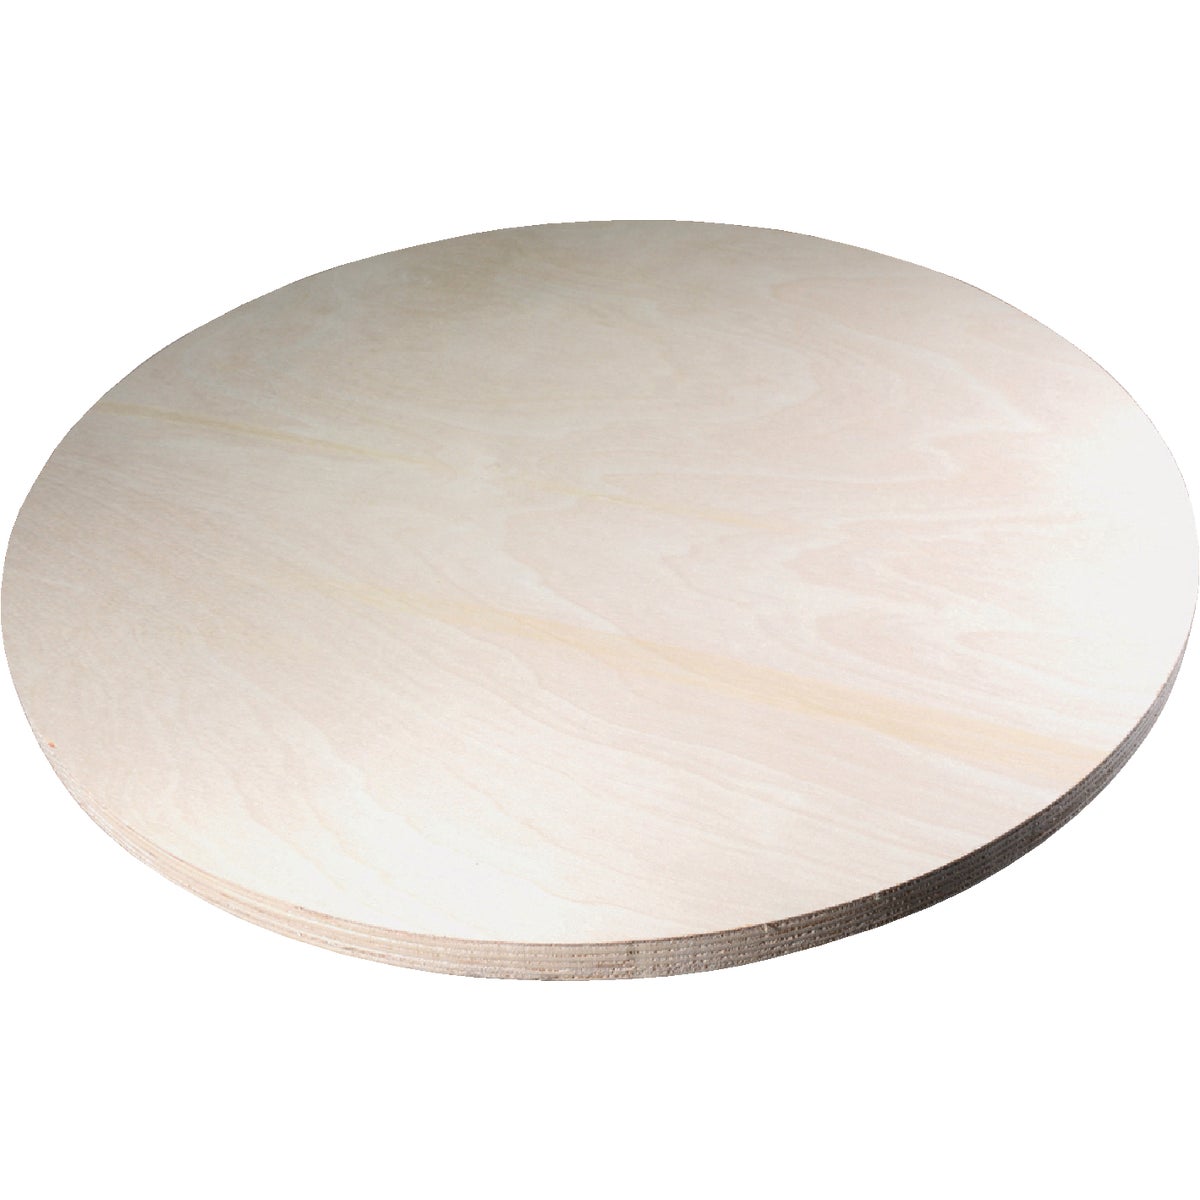 Alexandria Moulding 3/4 In. x 18 In. Plywood Round